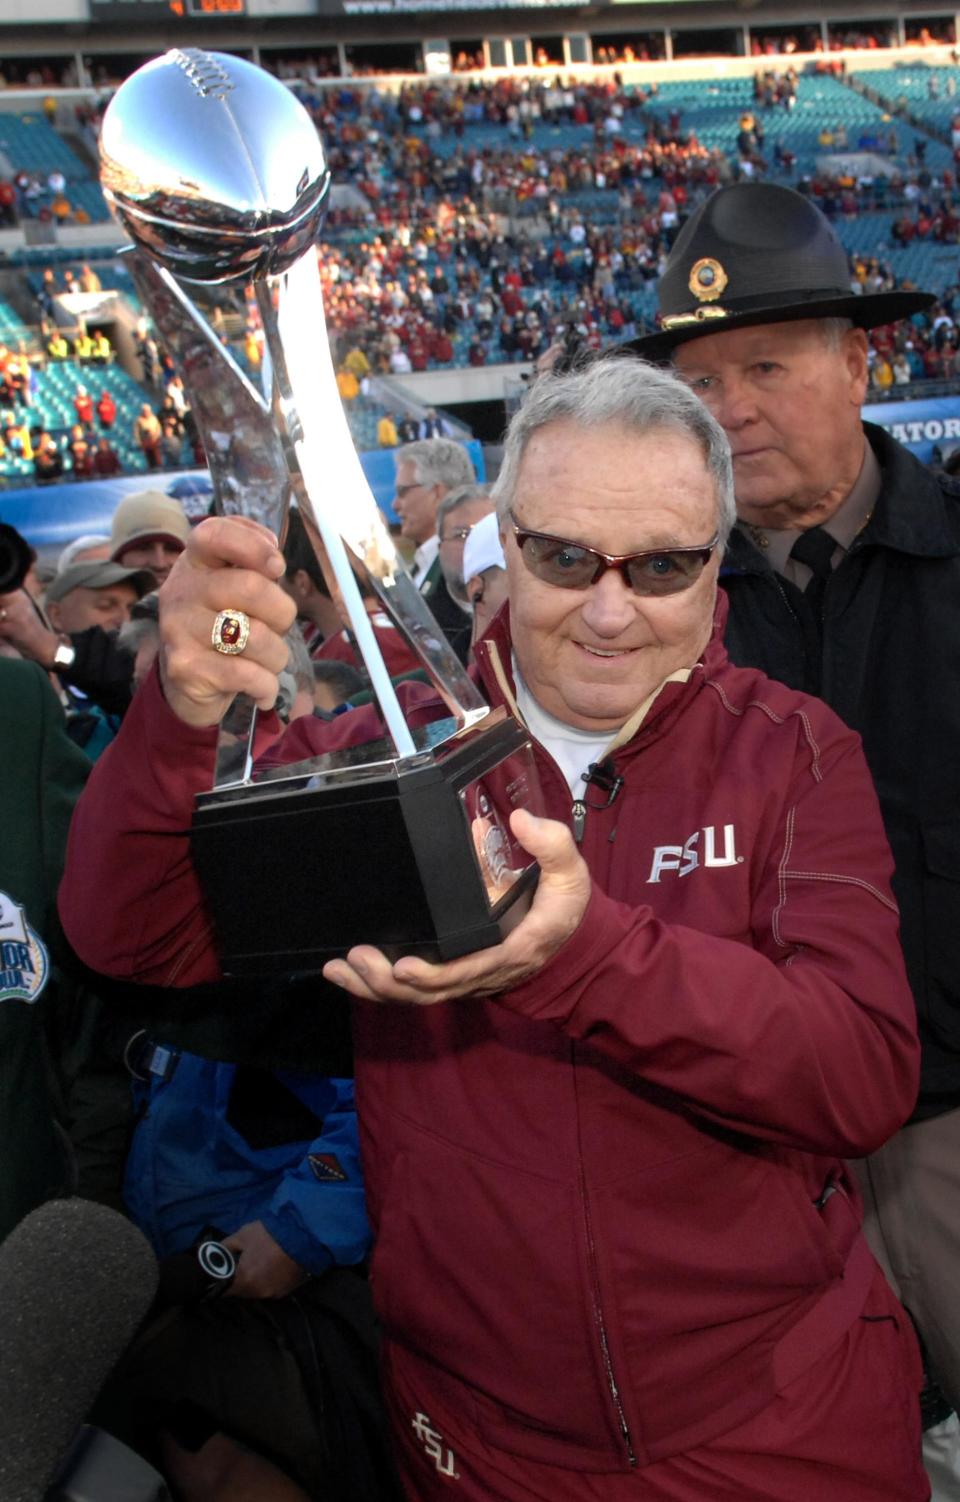 Florida State coach Bobby Bowden hoists the trophy after the Seminoles won the 2010 Gator Bowl over West Virginia, in the final game he coached.